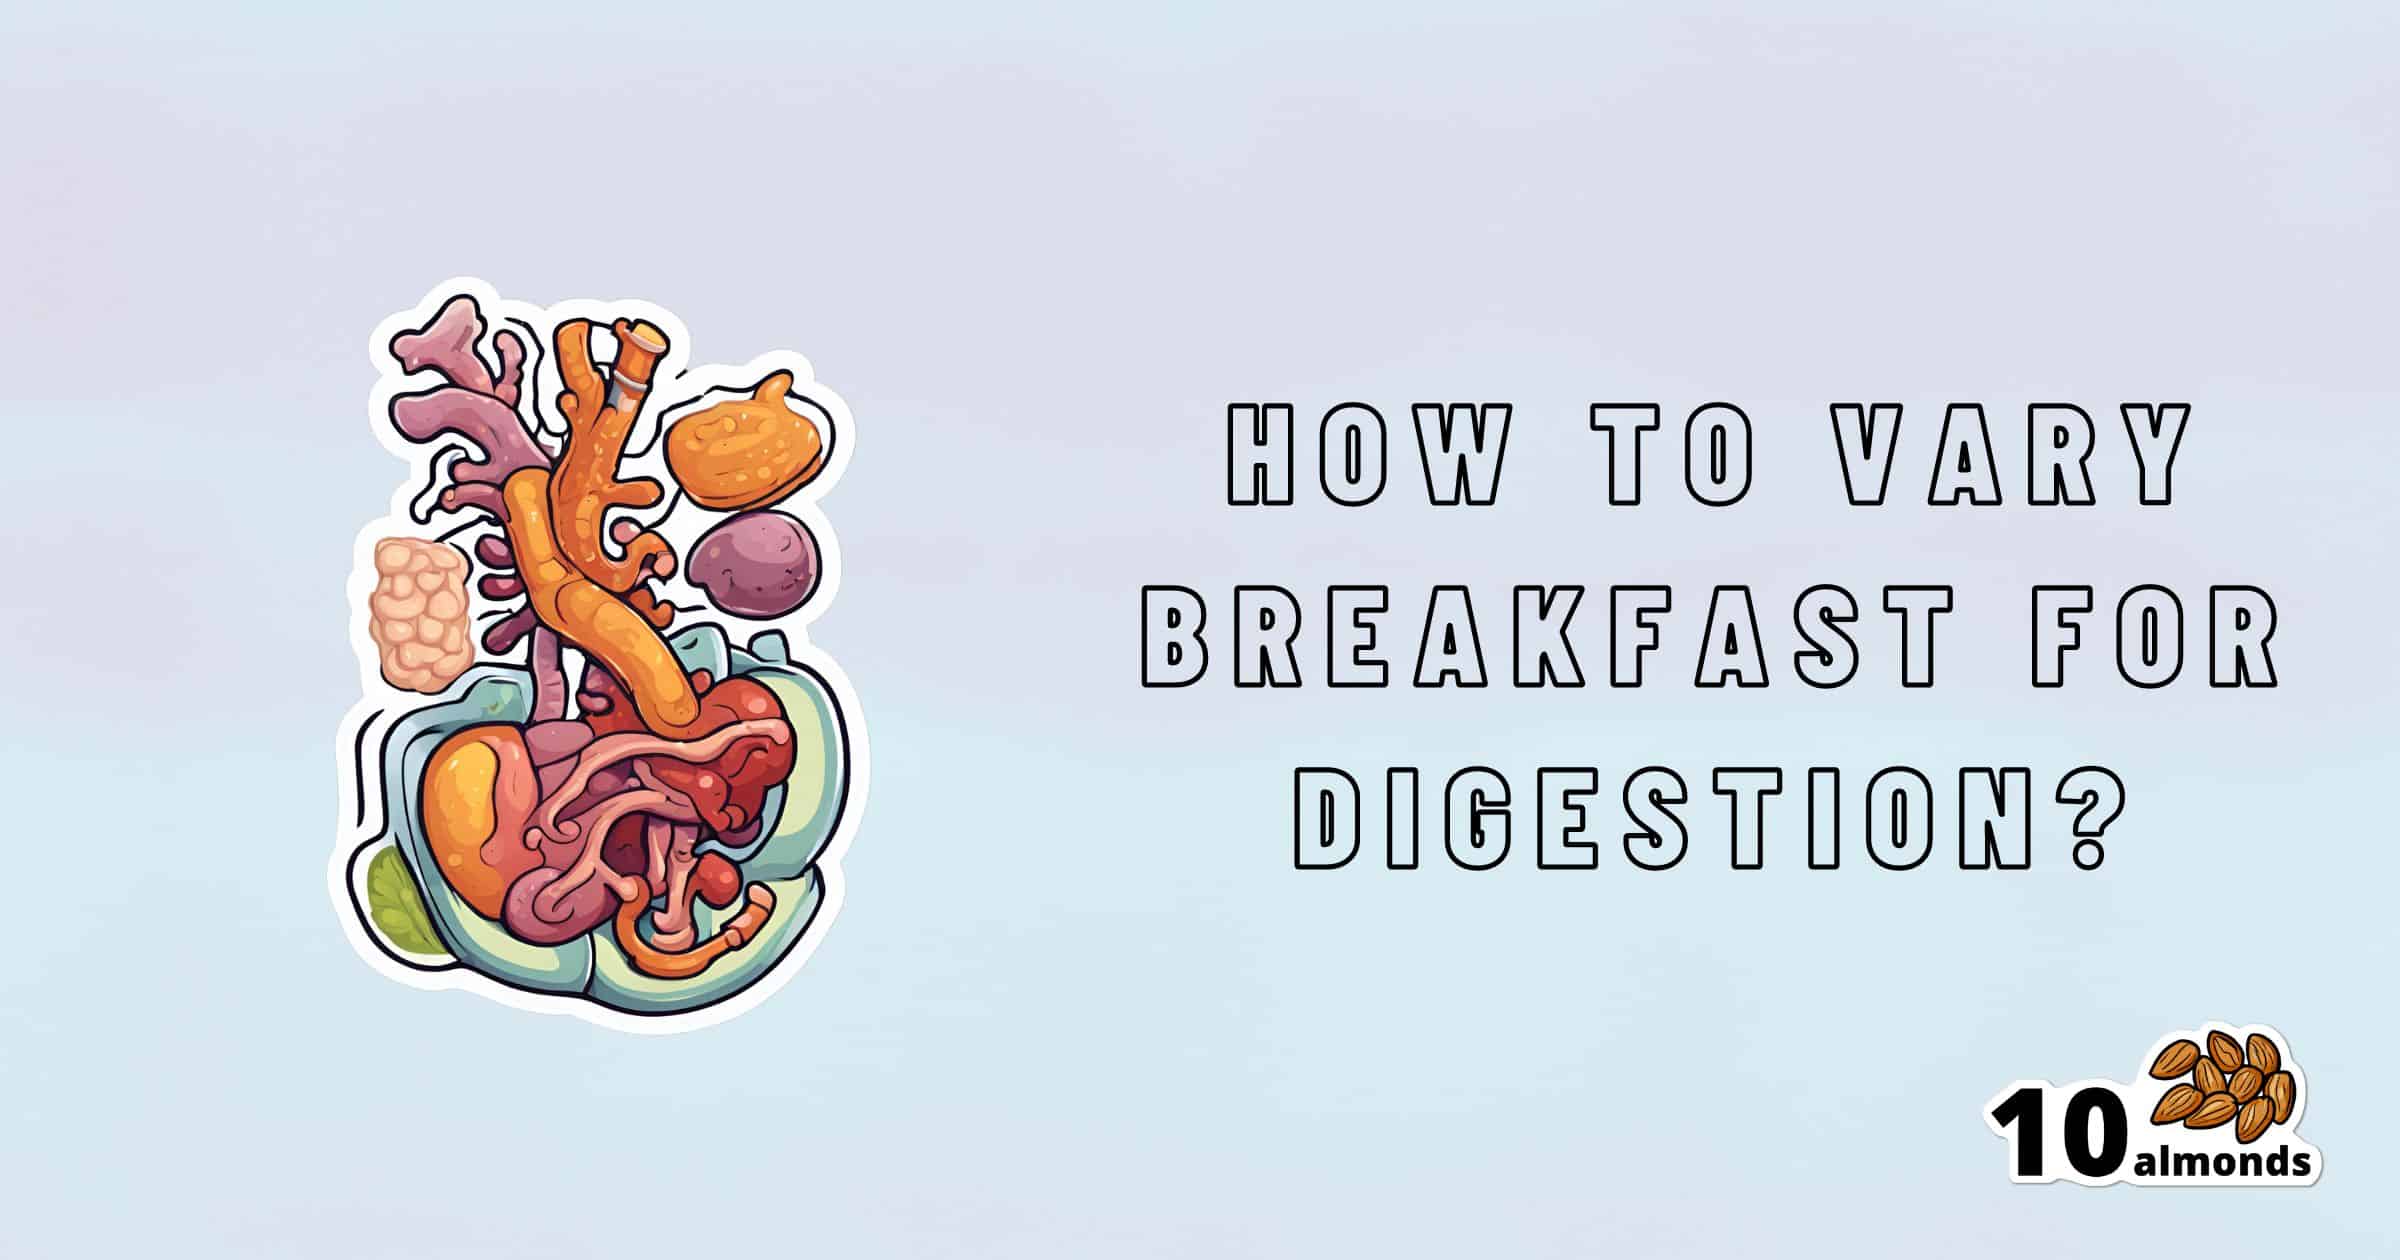 An illustration of the human digestive system is on the left. On the right, text reads "How to vary breakfast for digestion?" In the bottom right corner is an icon of 10 almonds. The background is light blue.